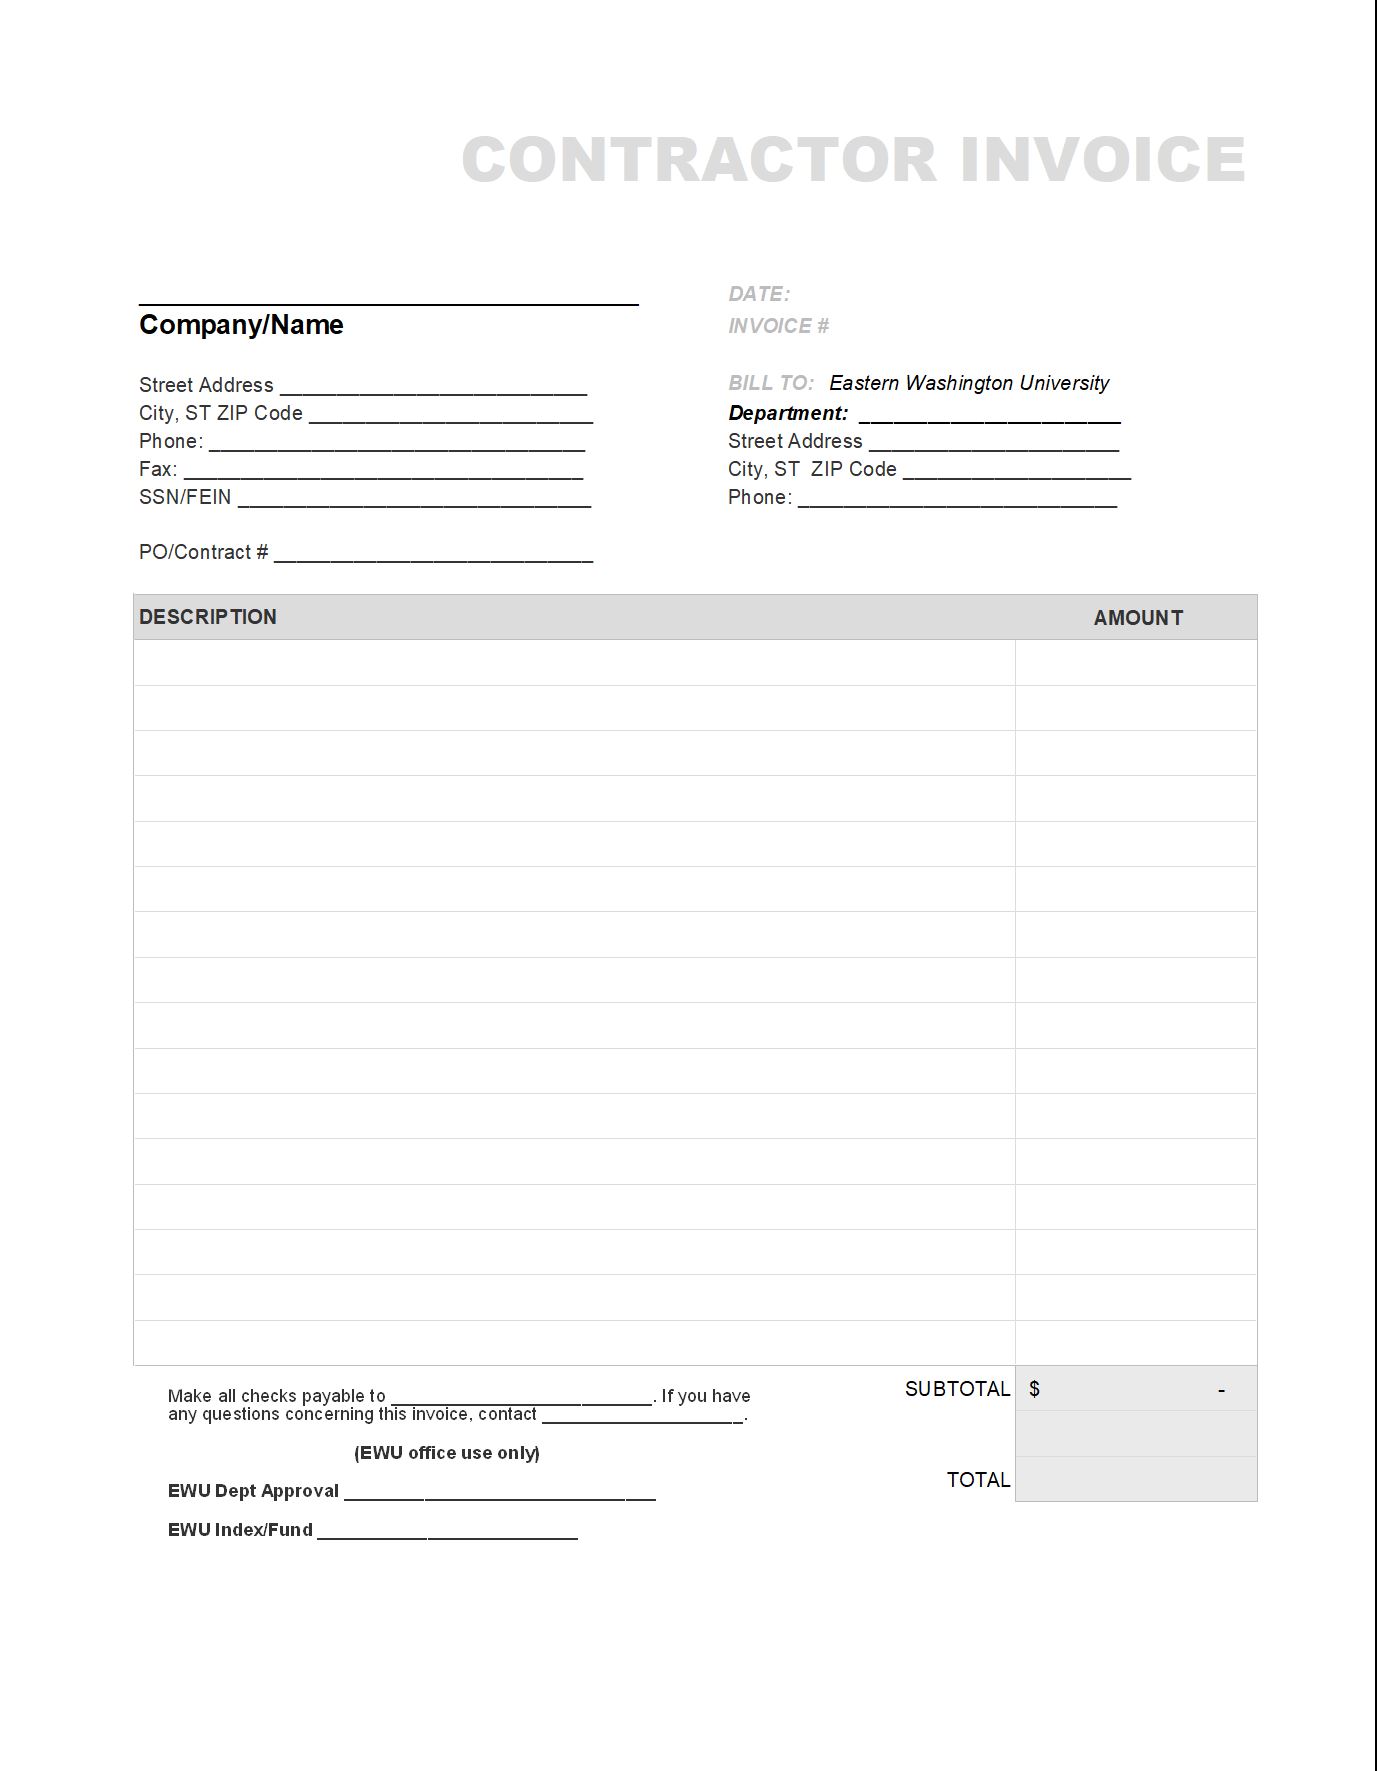 22 Independent Contractor Invoice Templates (FREE) With Regard To 1099 Invoice Template